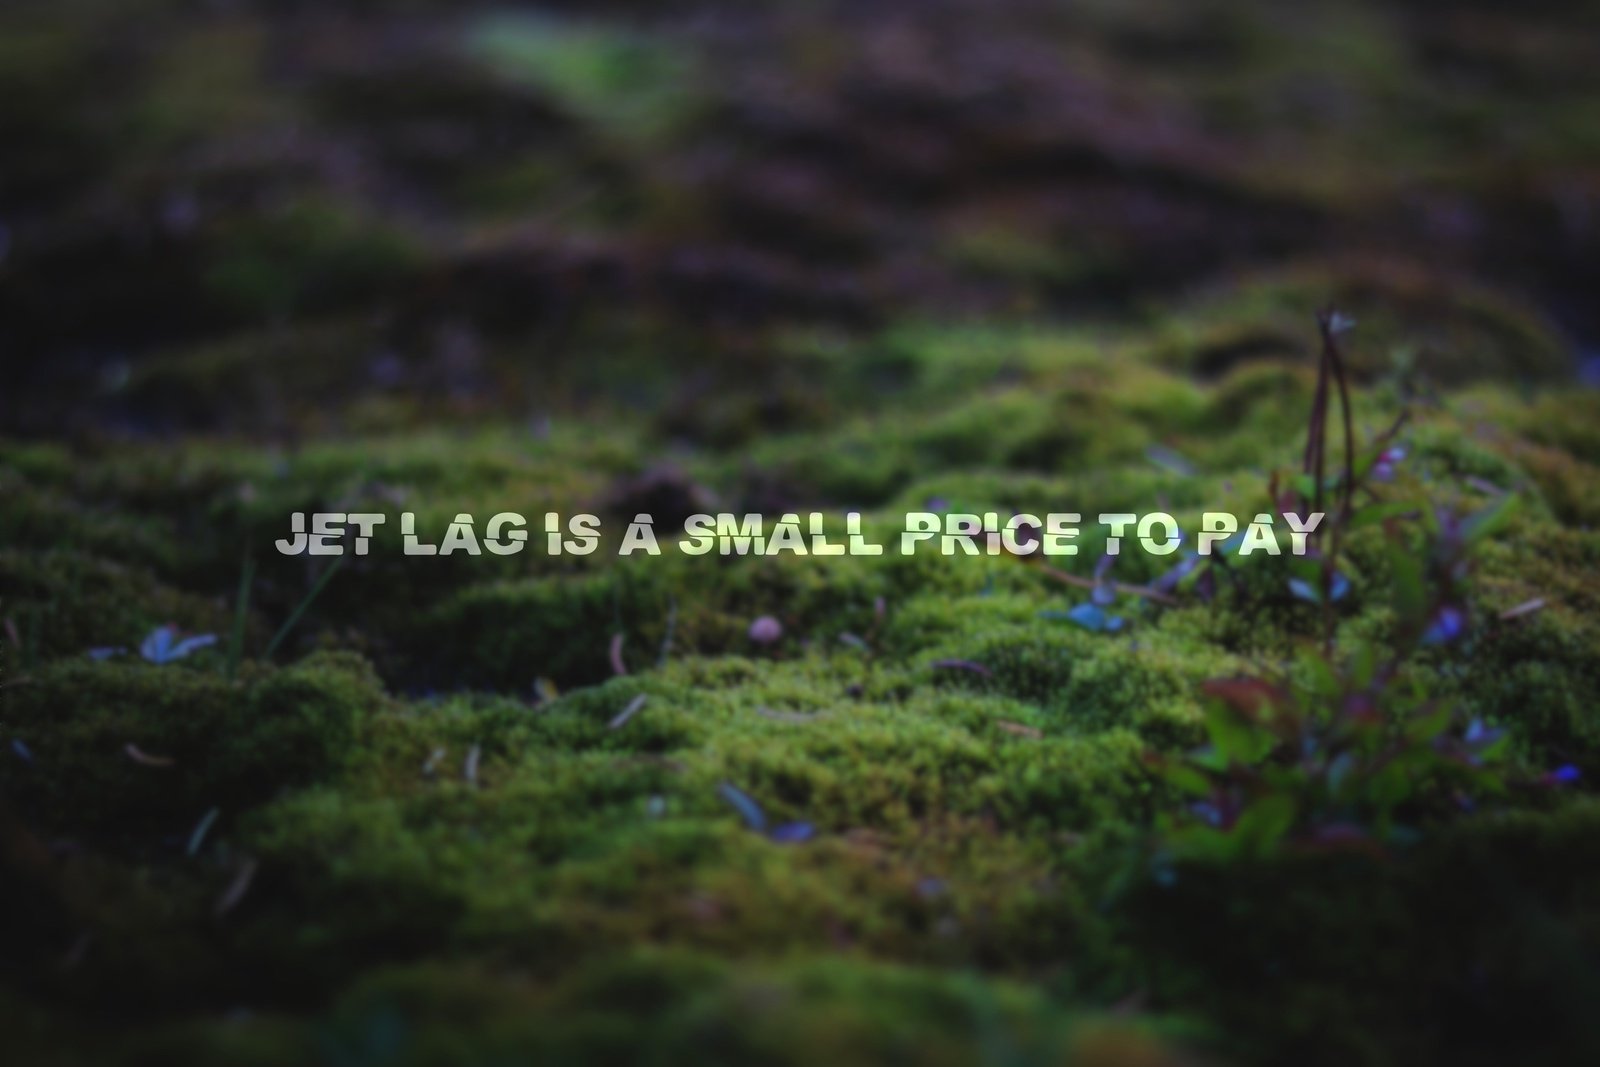 arte - JET LAG IS A SMALL PRICE TO PAY - 15" x 5/8"